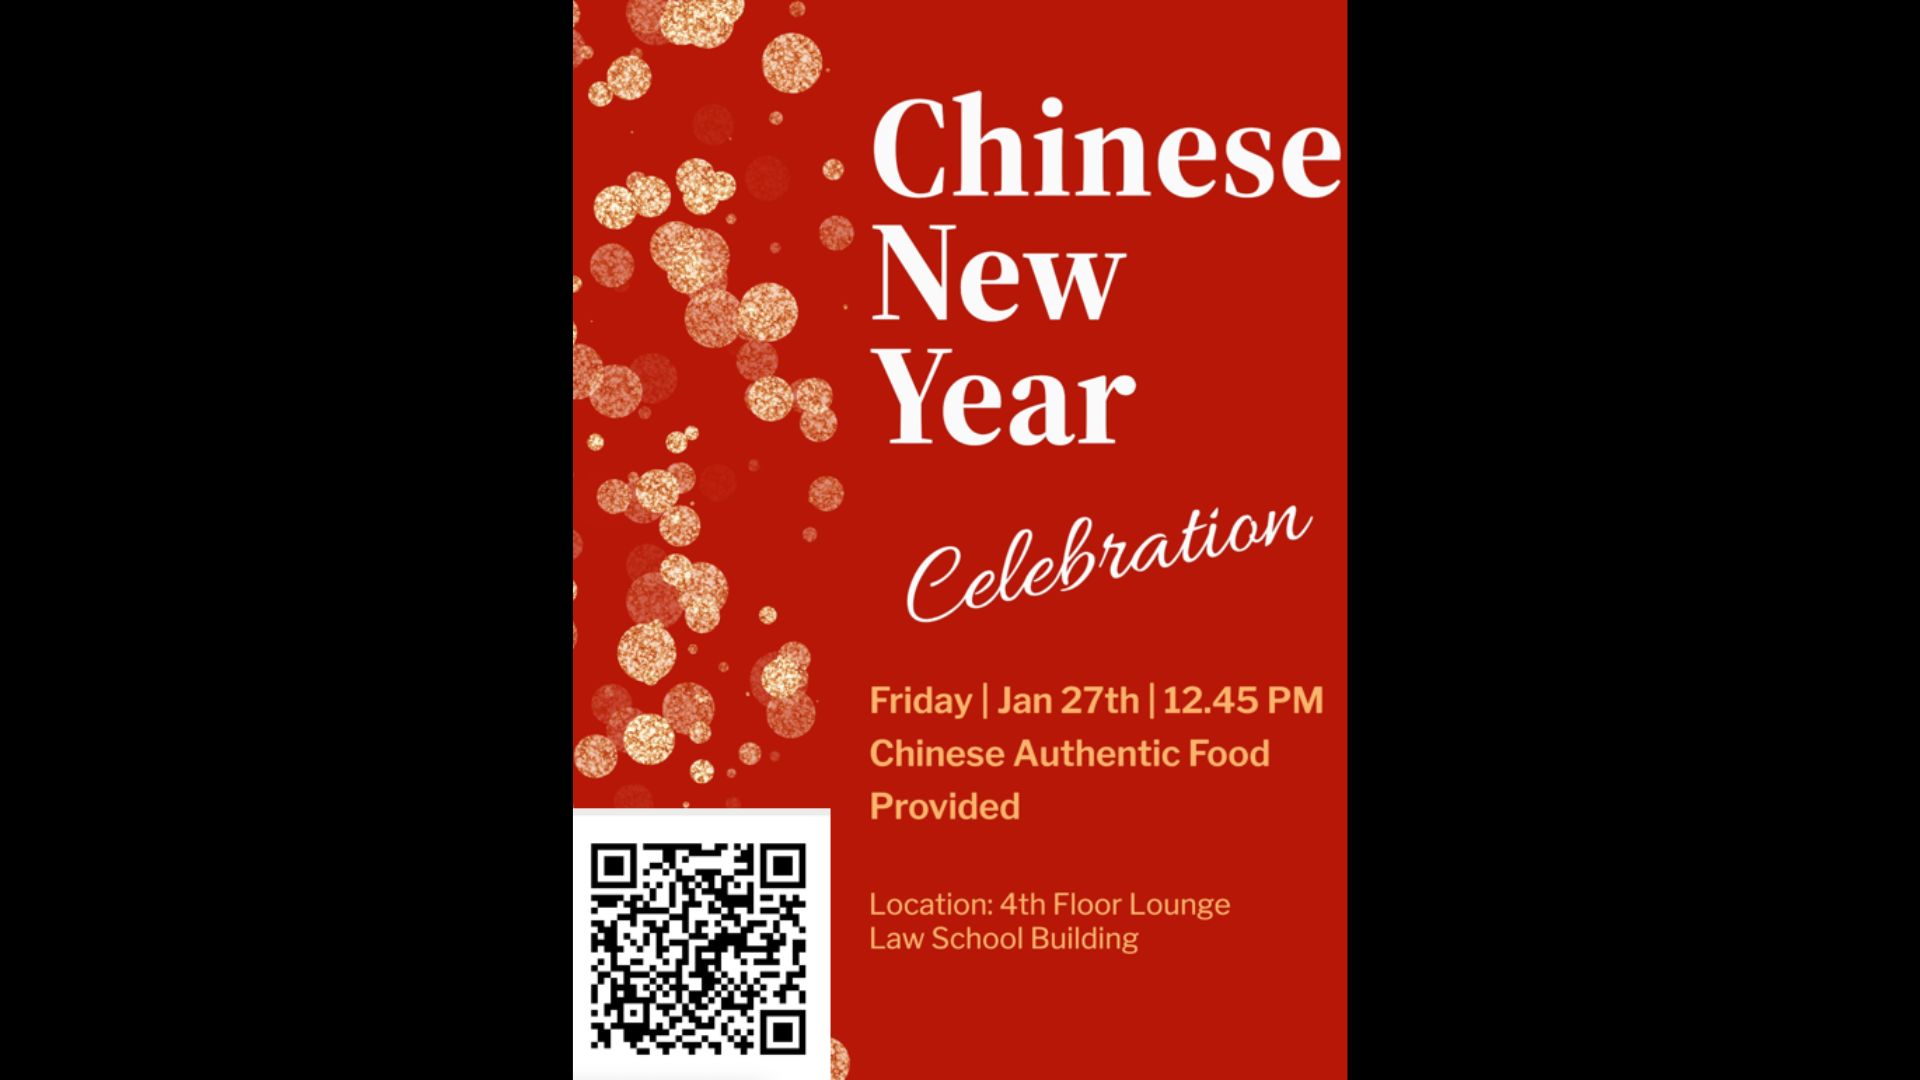  Lunar New Year Celebration    Friday, January 27, 12:45 pm    Chinese Authentic Food Provided    Location: 4th Floor Lounge, Law School Building